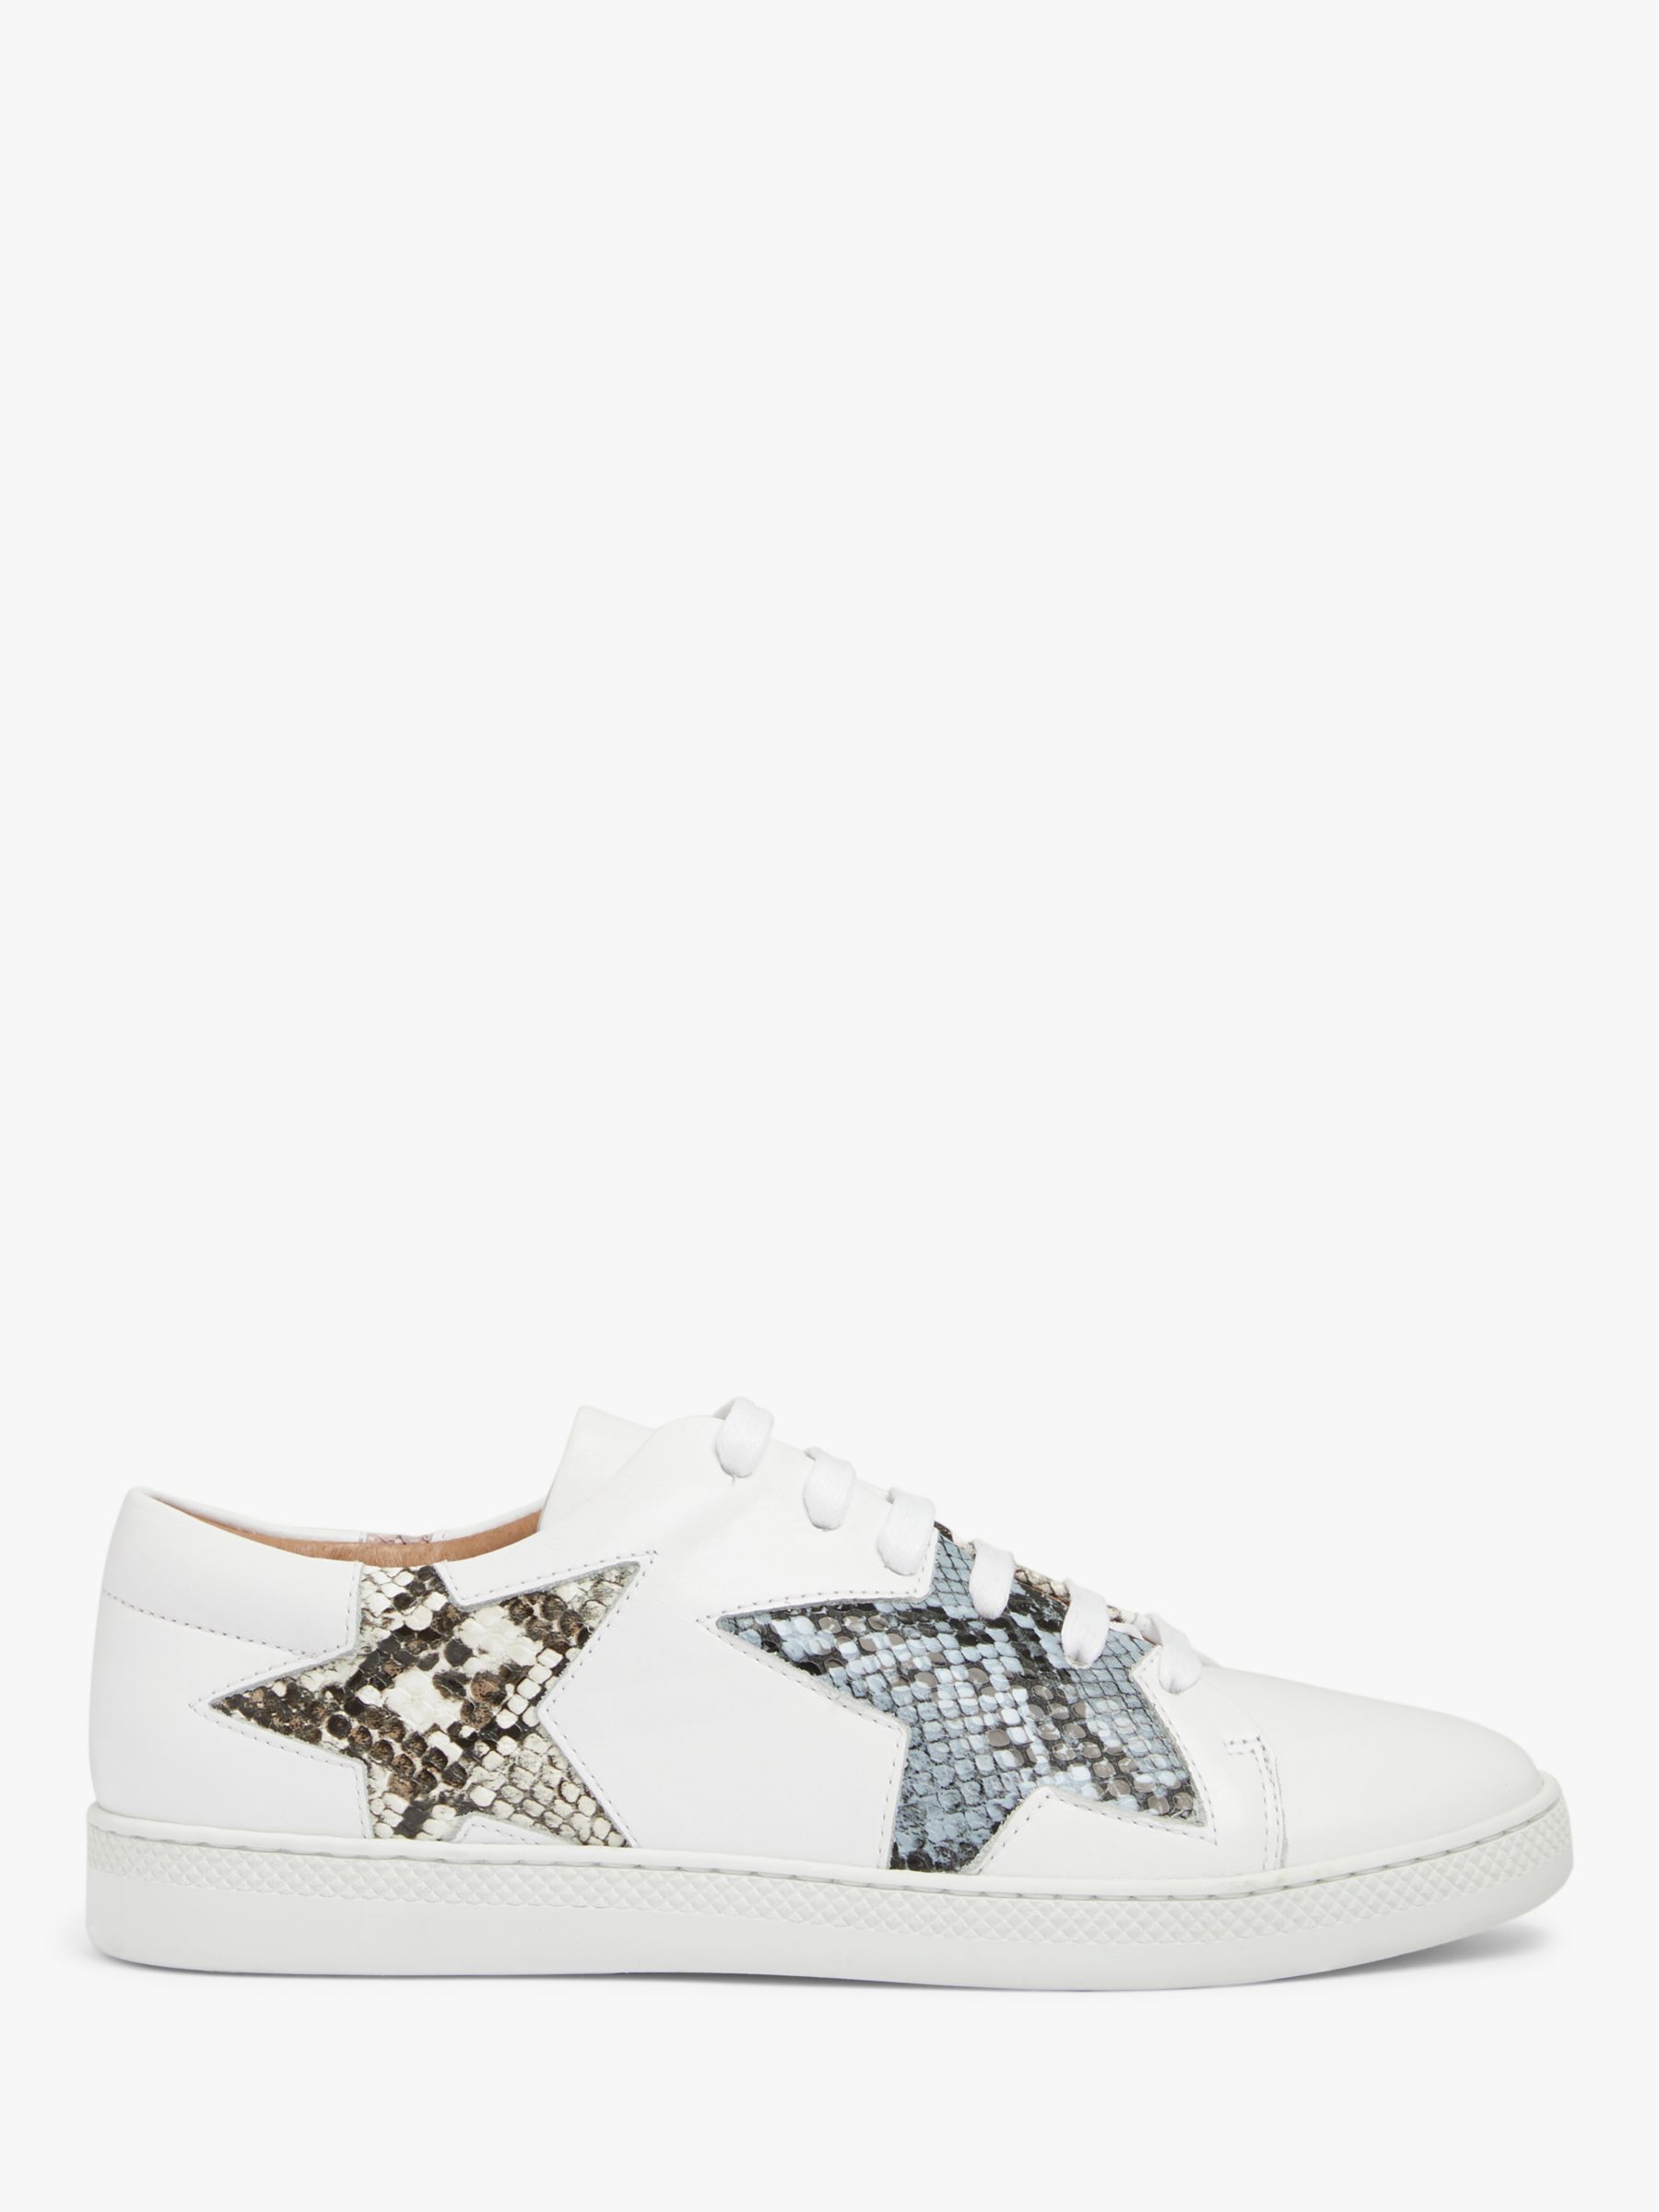 AND/OR Edie Snake Star Trainers, White